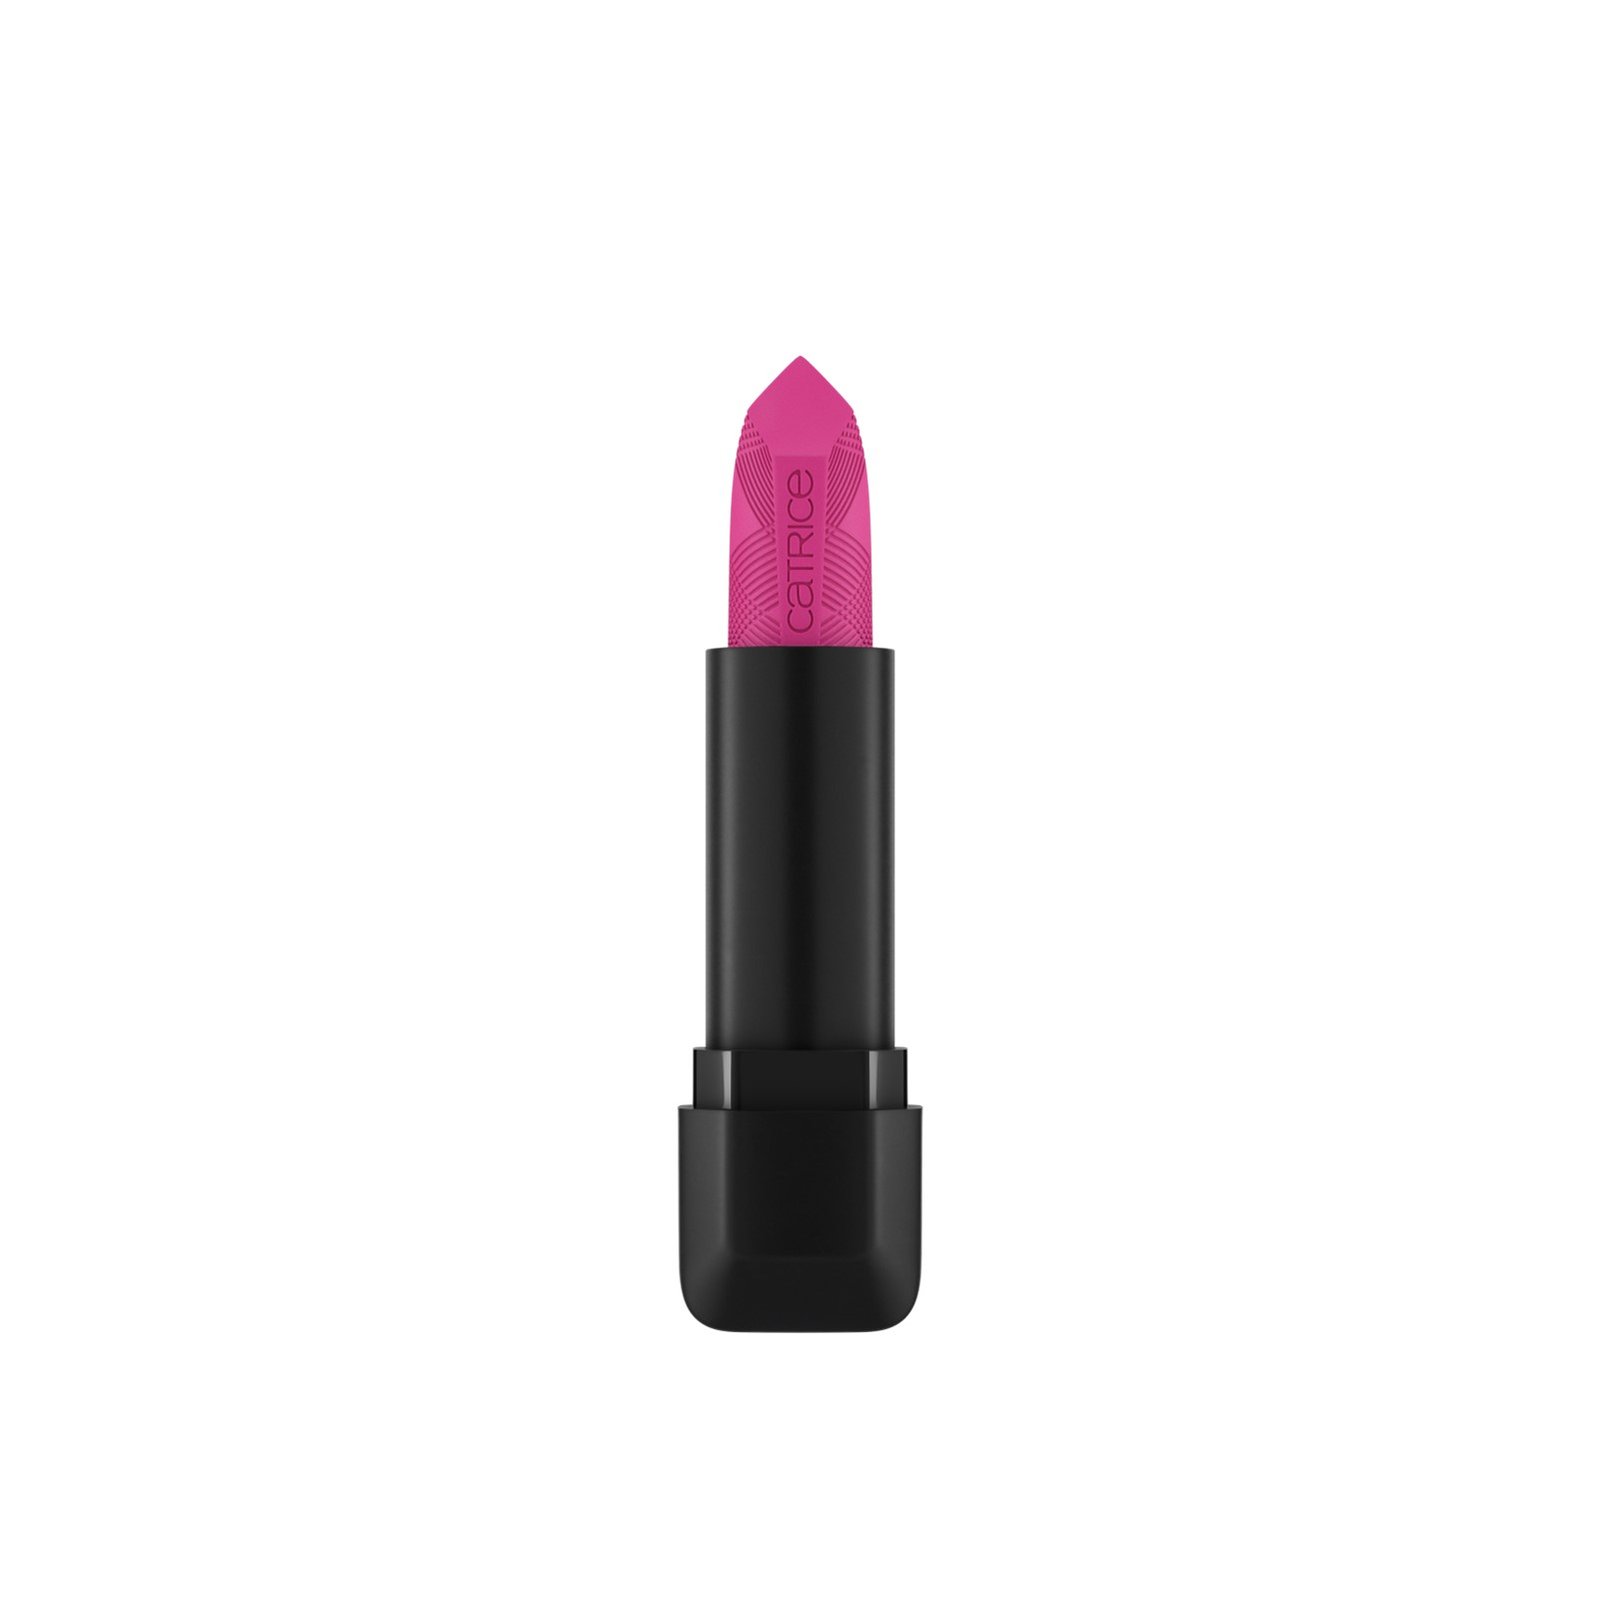 Catrice Scandalous Matte Lipstick 080 Casually Overdressed 3.5g